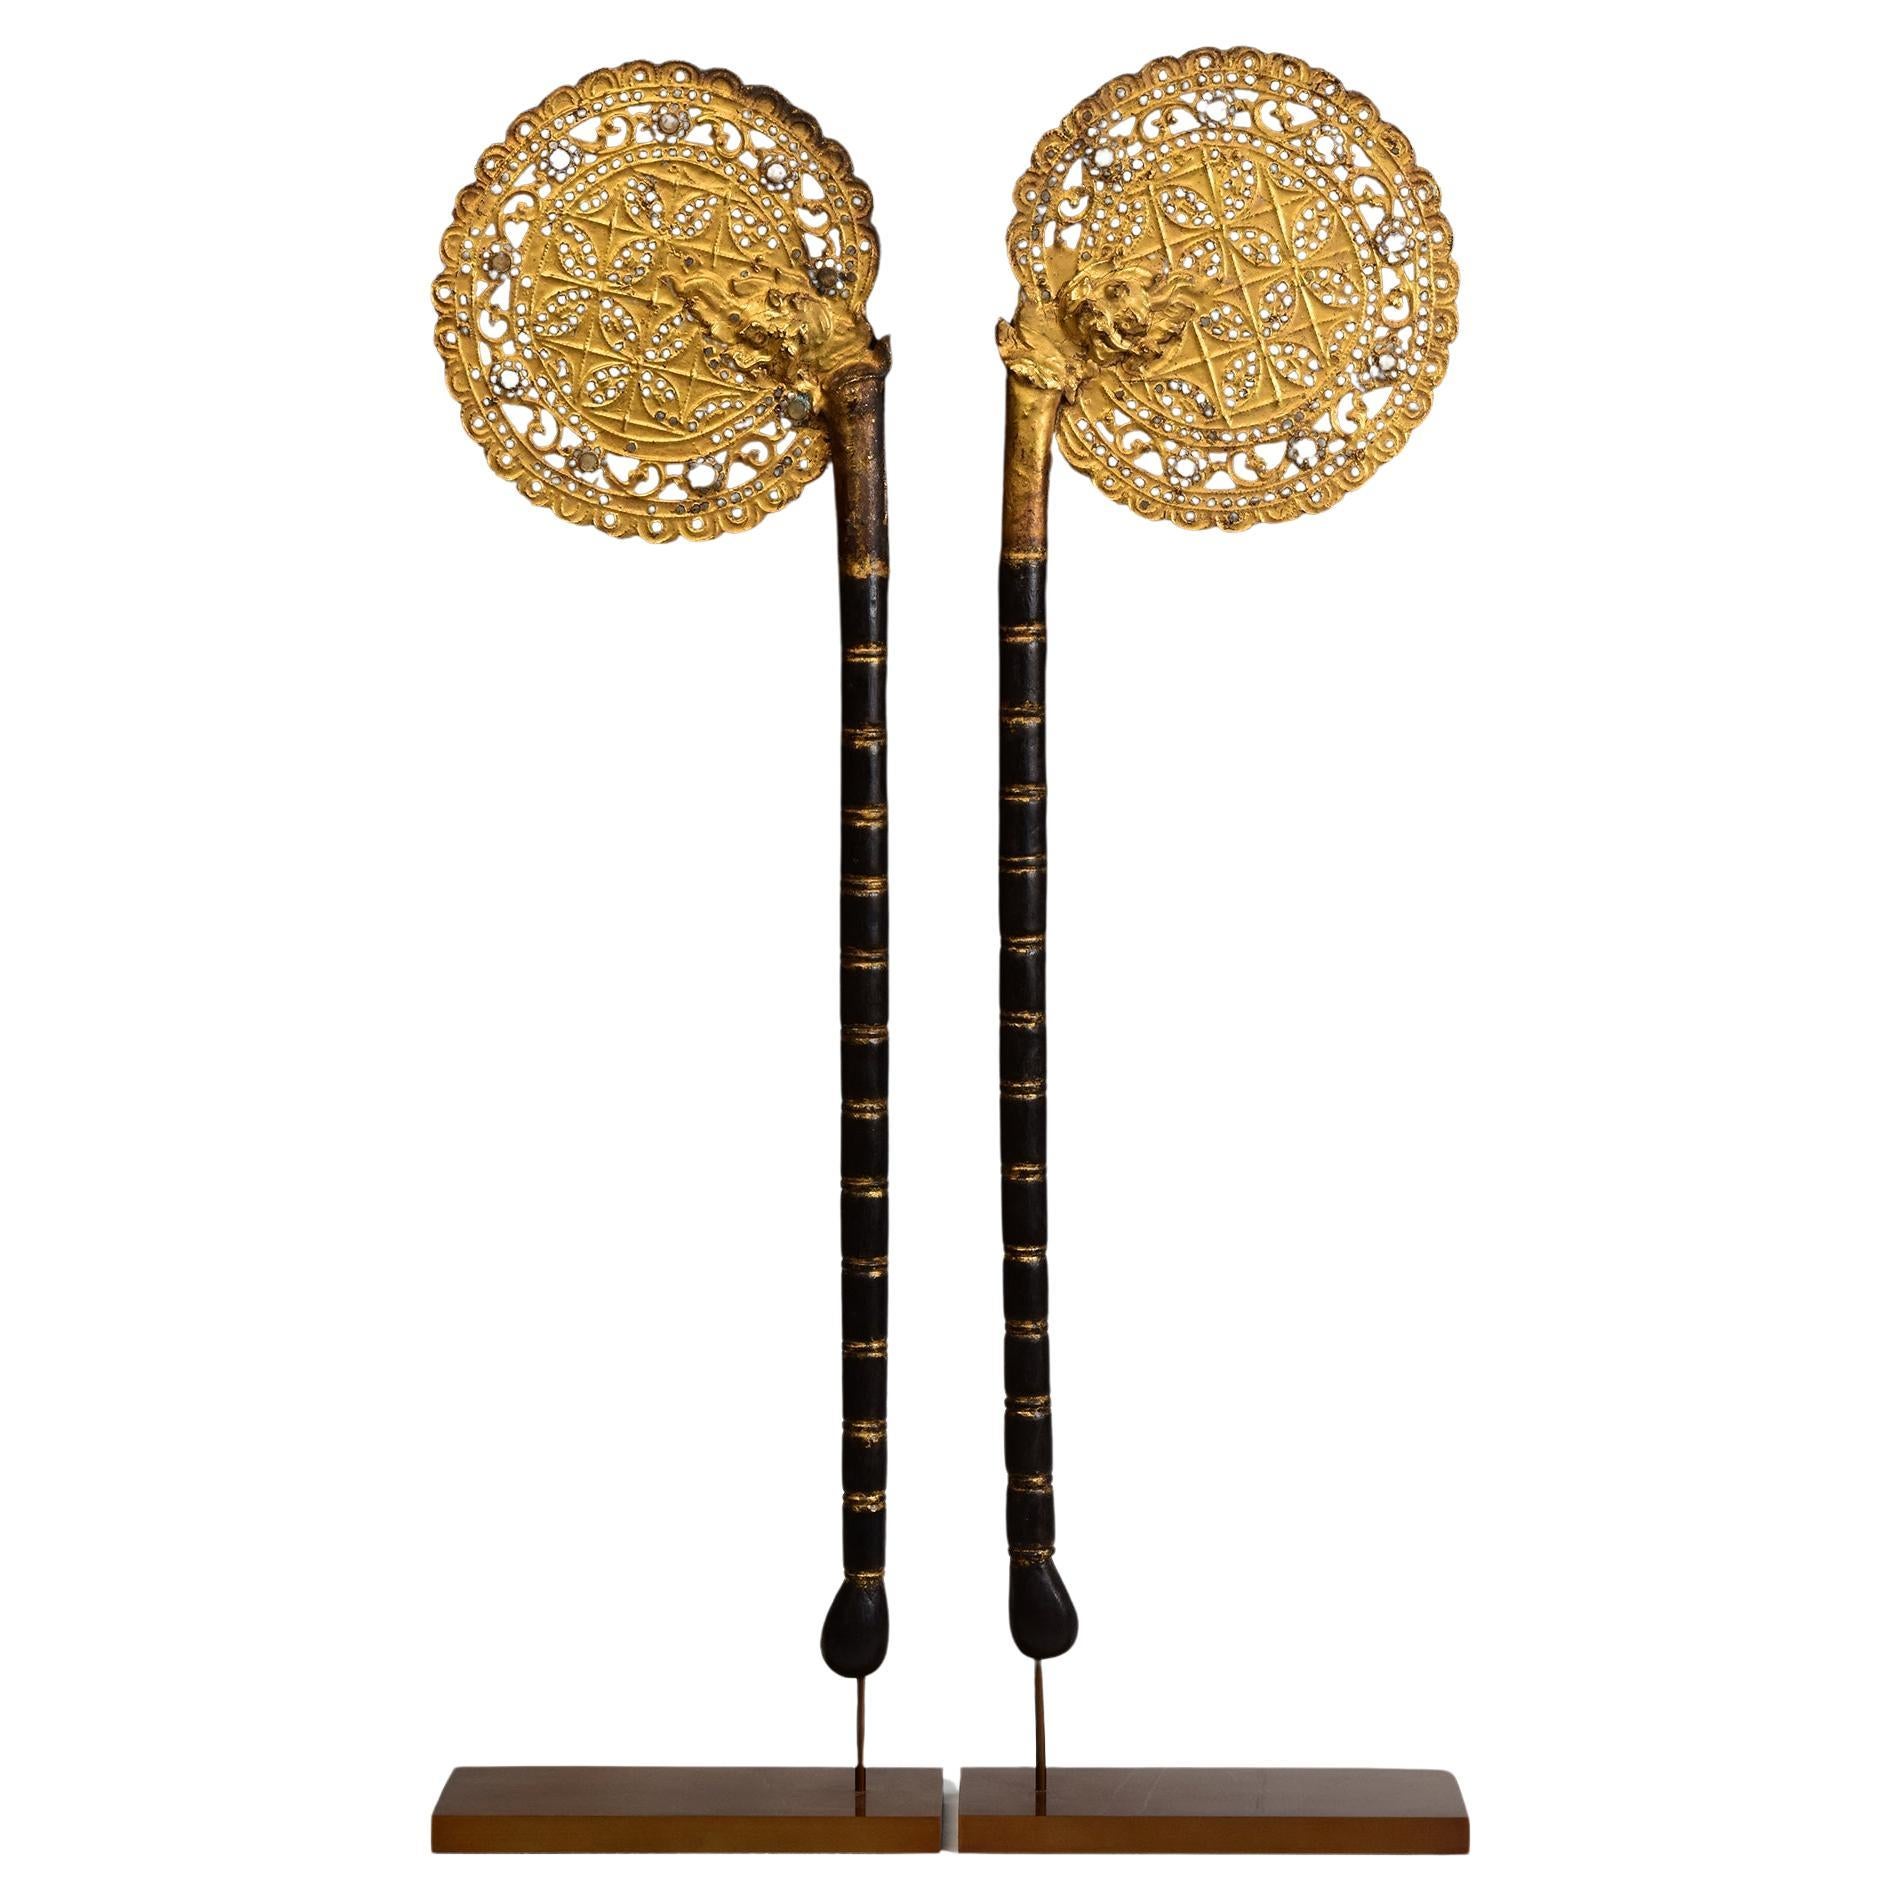 19th Century, A Pair of Antique Burmese Wooden Fans with Gilded Gold and Glass